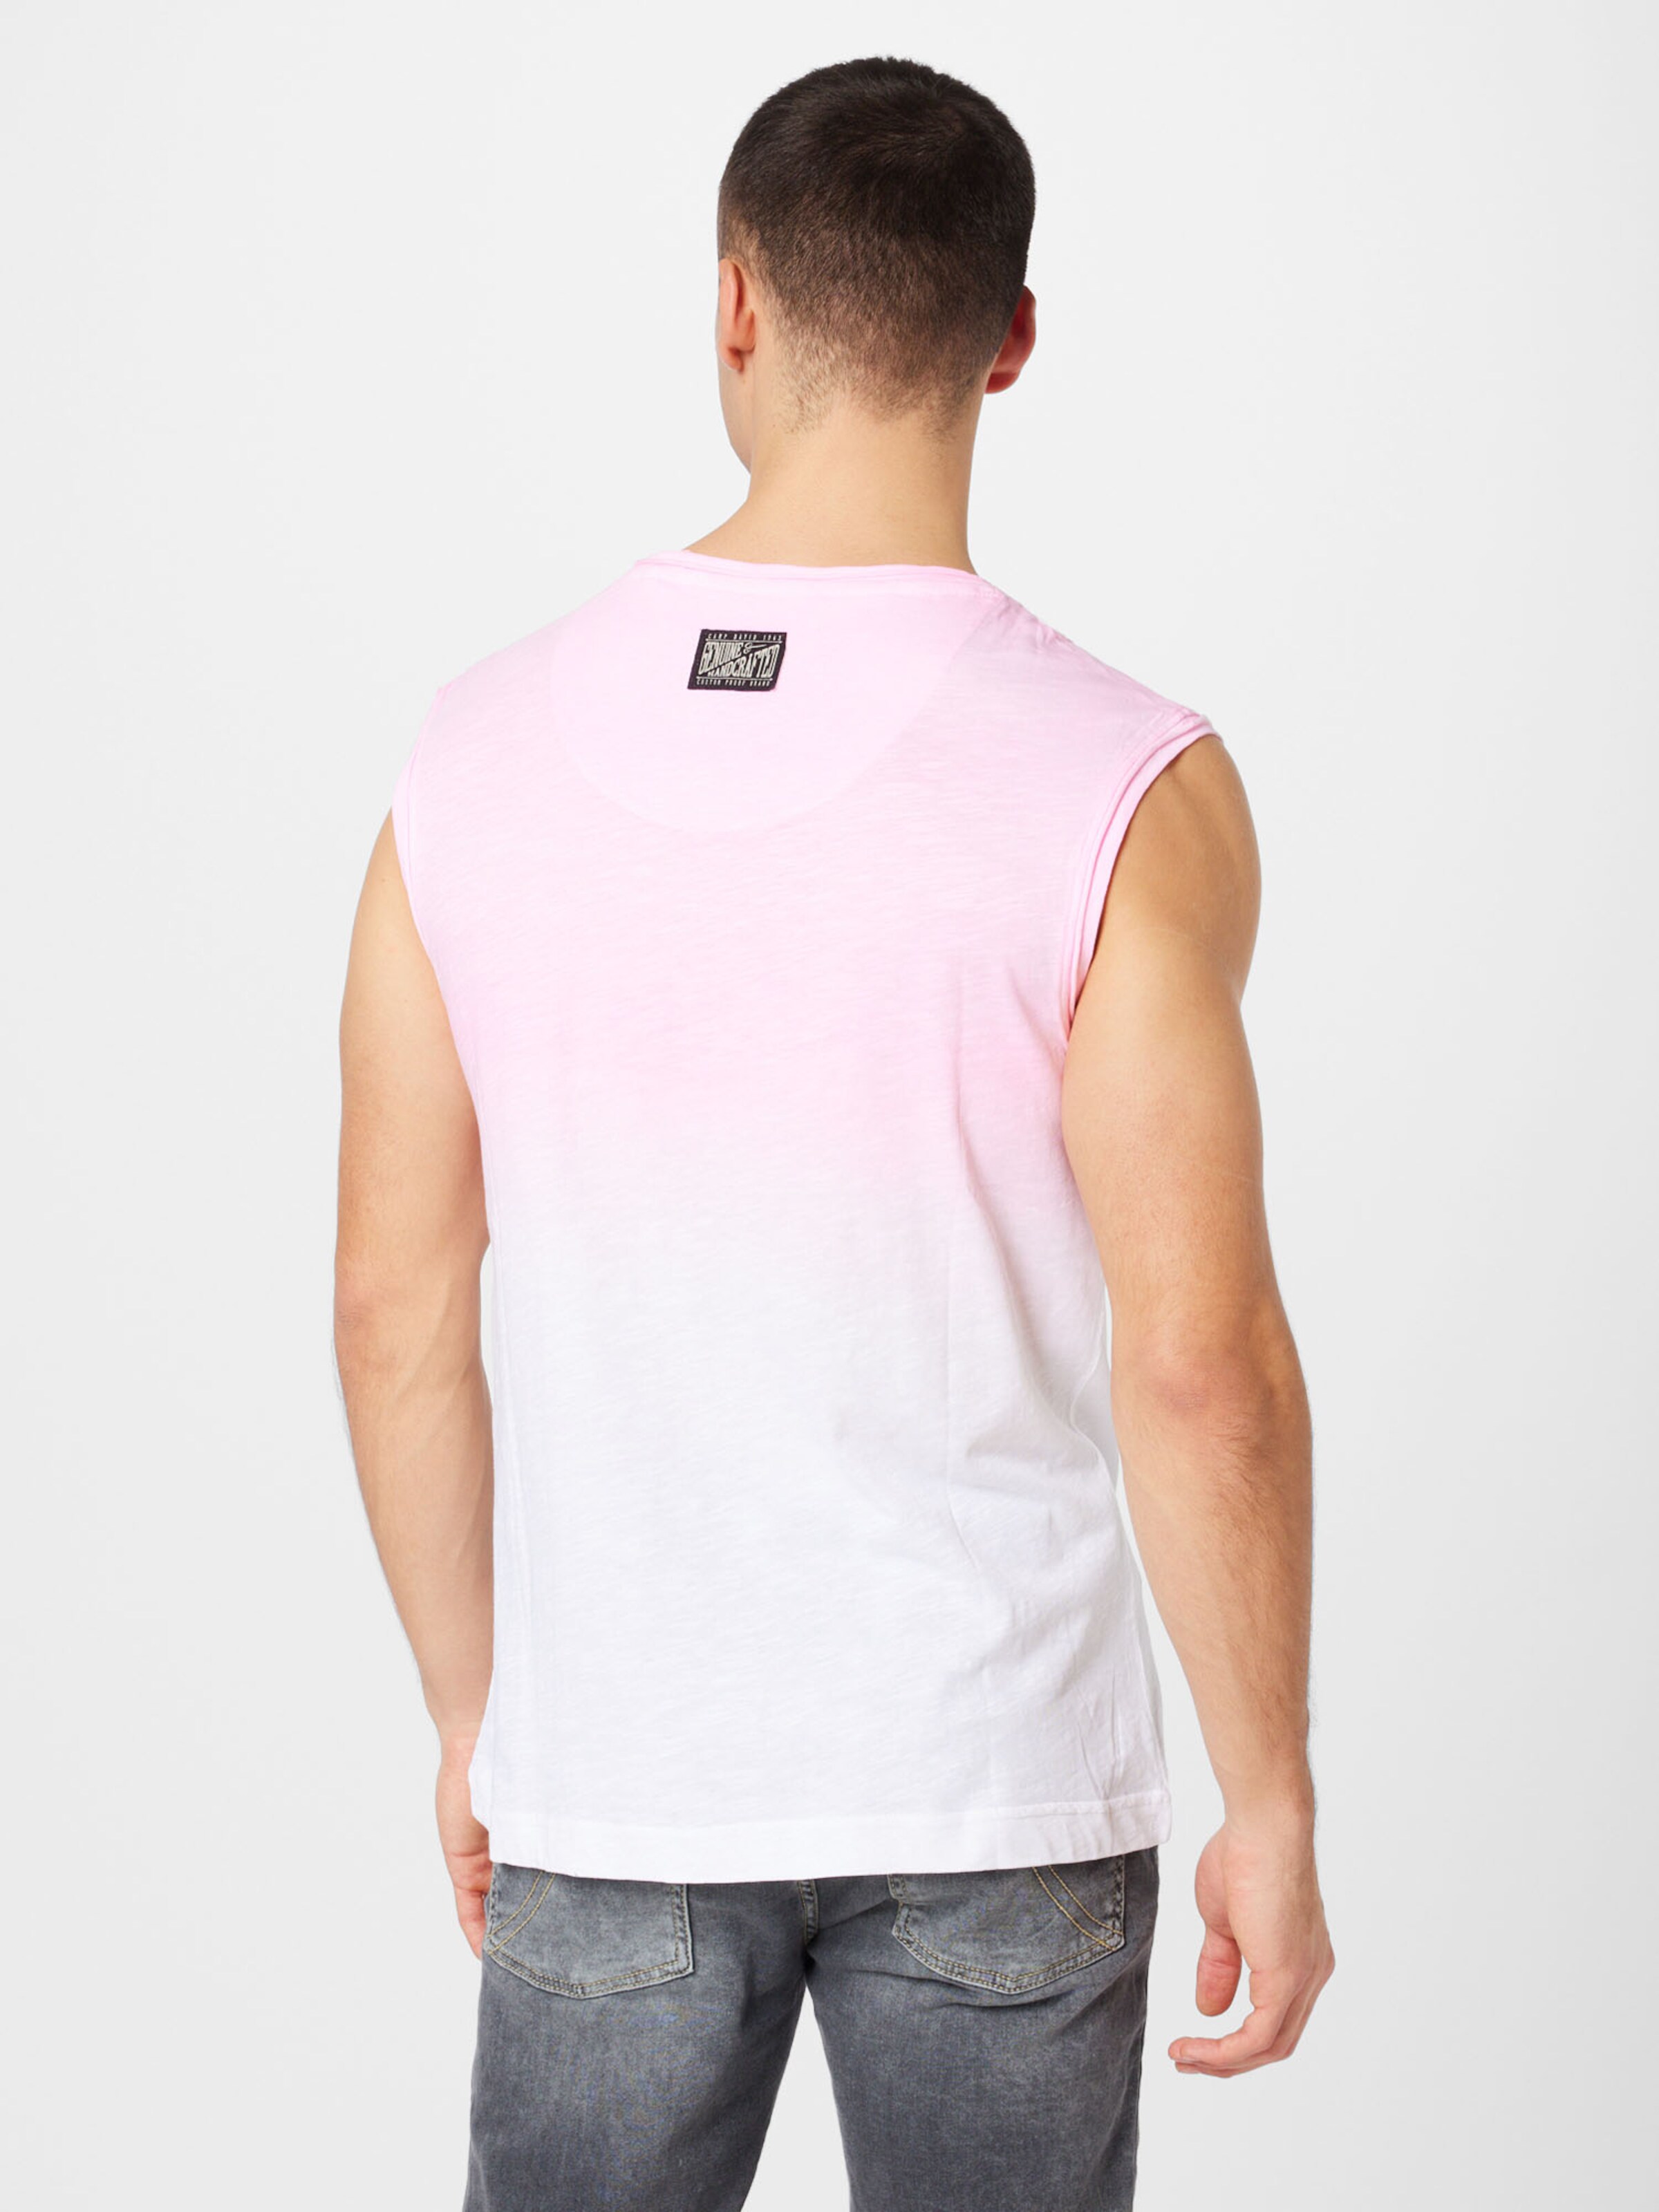 CAMP DAVID T-Shirt in Neonpink | ABOUT YOU